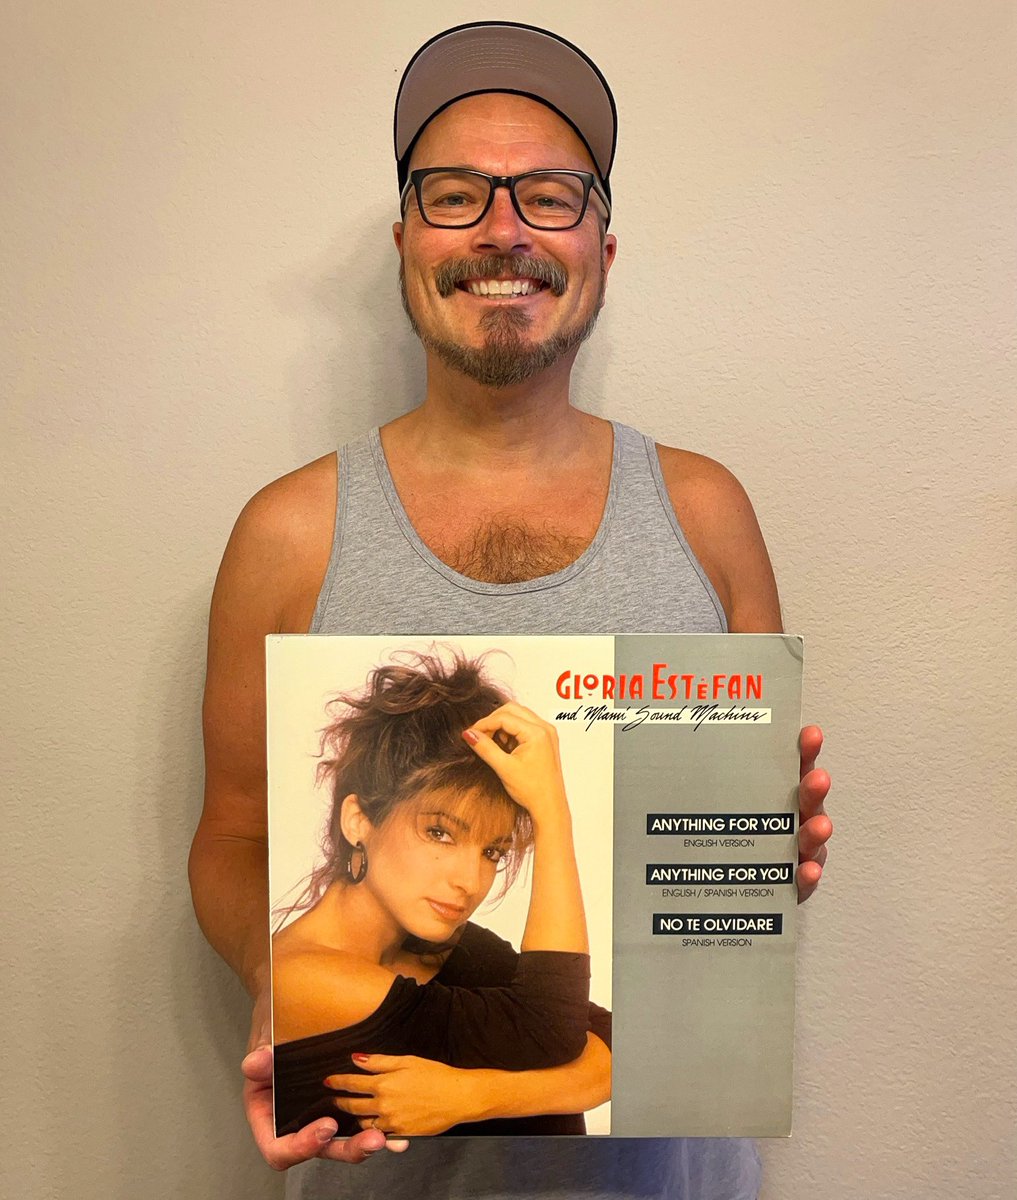 For the week ending May 14, 1988, Gloria Estefan & Miami Sound Machine topped the #billboardhot100 chart with Anything For You, their first #1 smash. It hit #1 on my weekly chart.

#gloriaestefan #miamisoundmachine #anythingforyou #letitloose #80smusic #todayinpopmusic